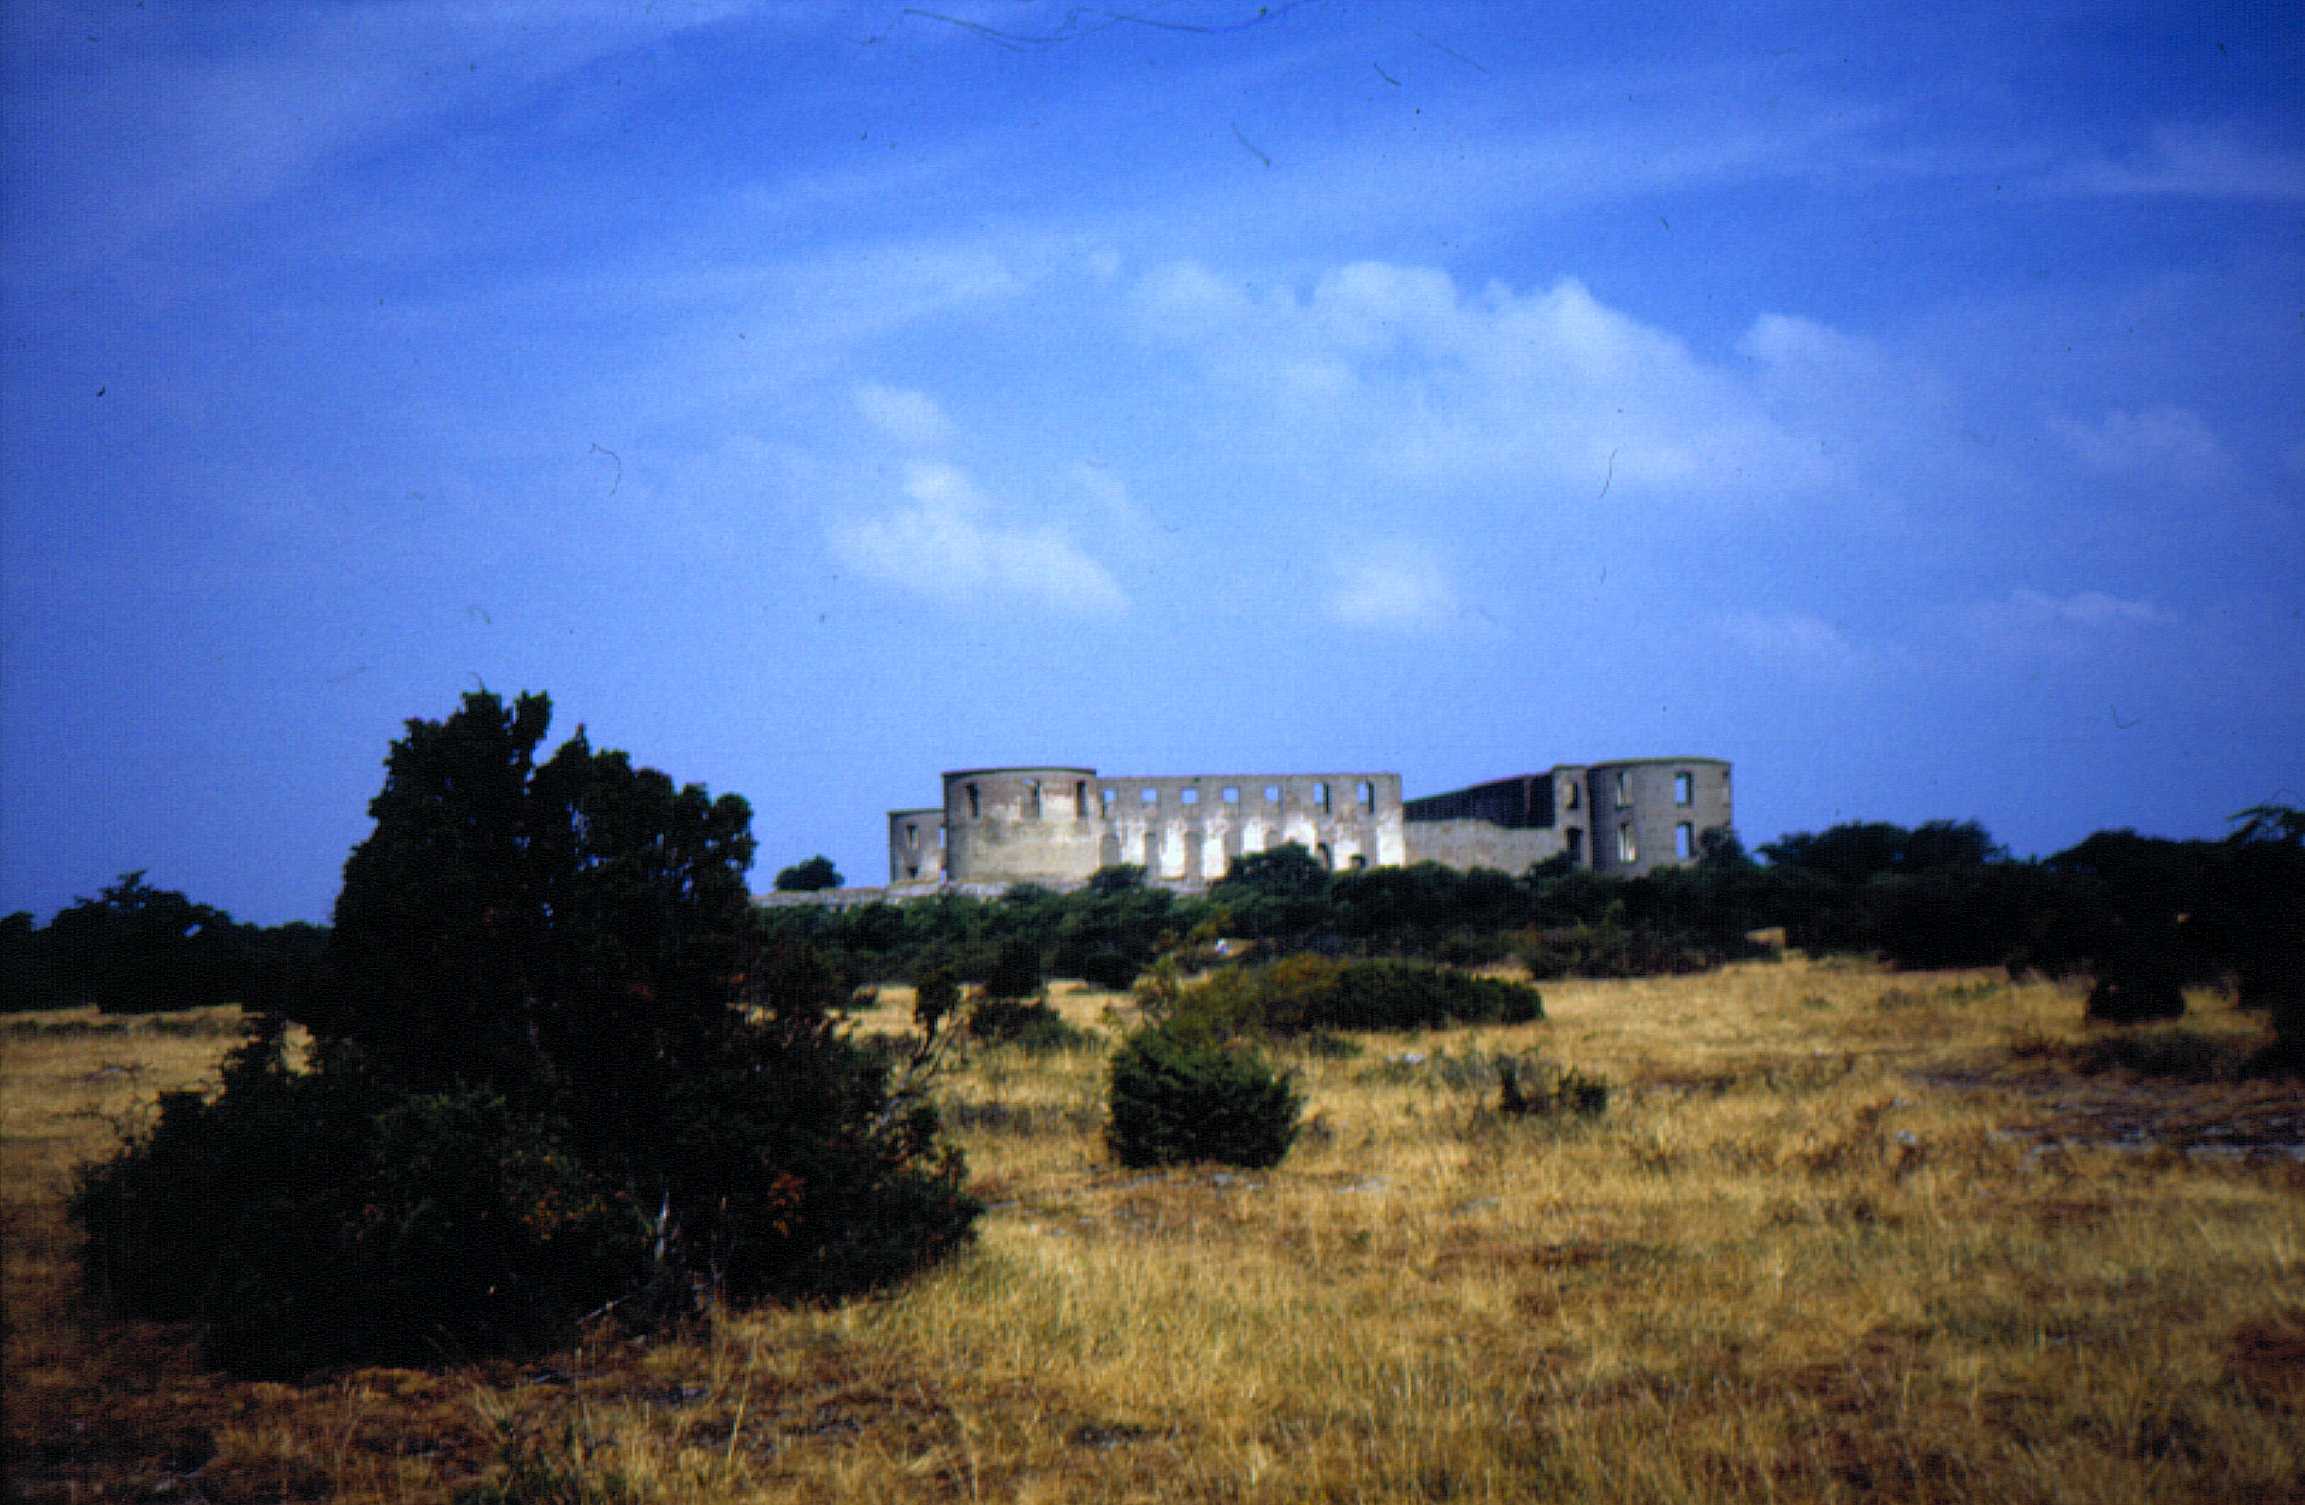 Borgholm's ruined castle, which forerunner was the stronghold where king Björn reside in 830. Photo in 1999 by Kjell Åberg